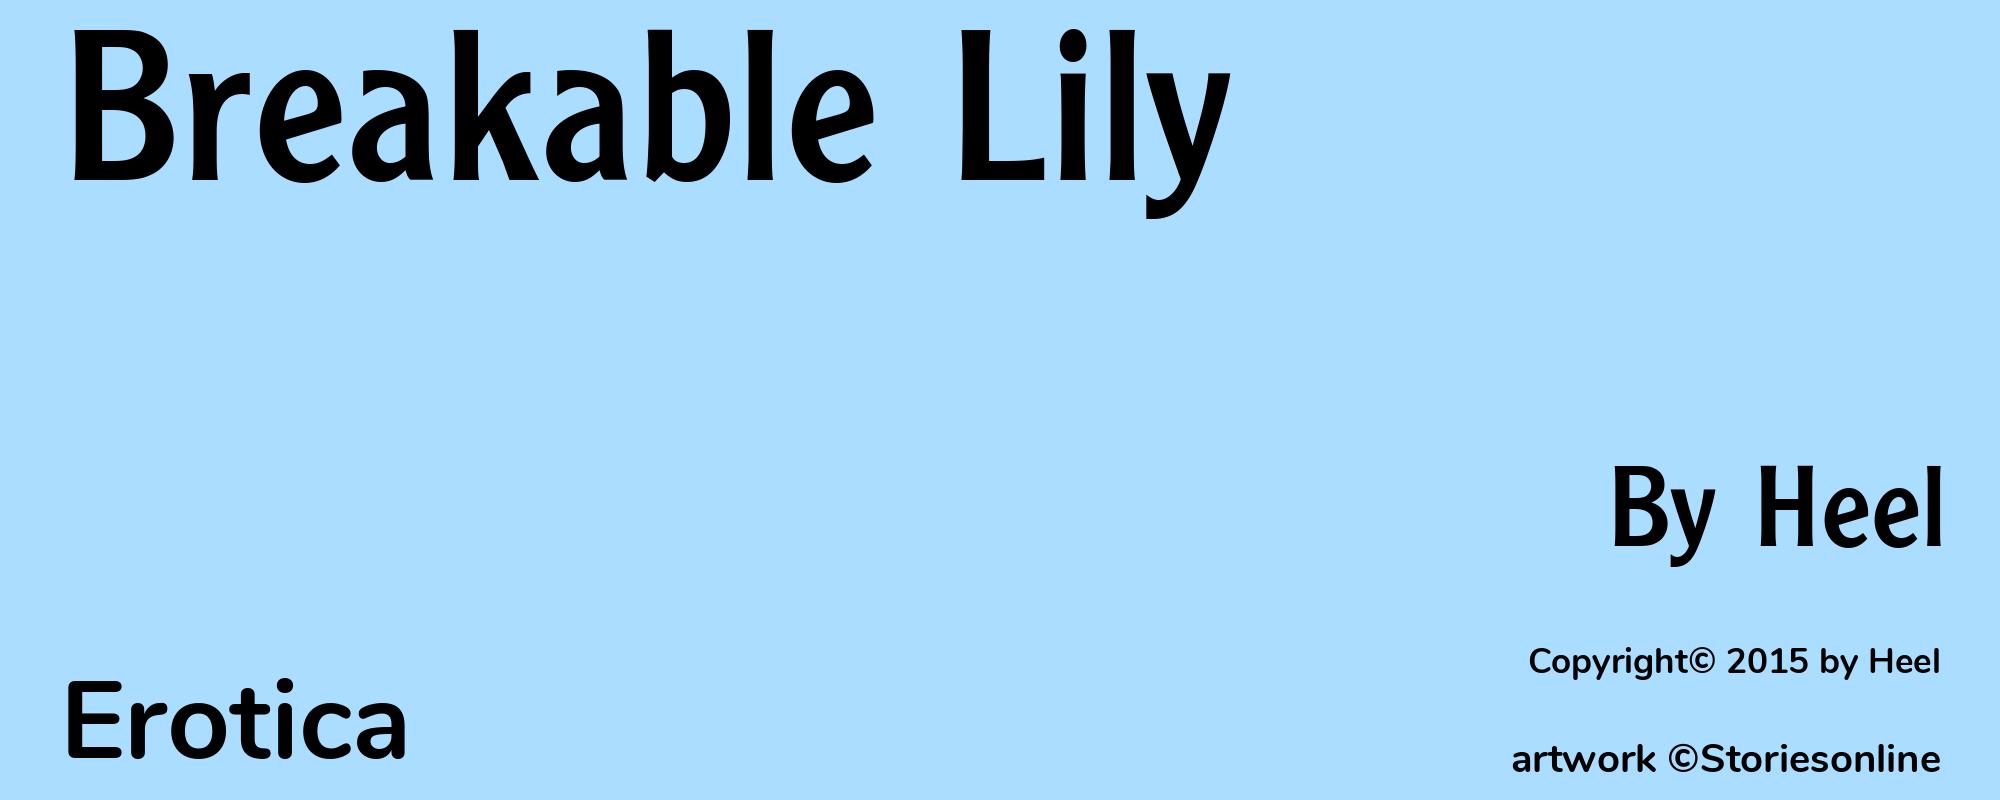 Breakable Lily - Cover